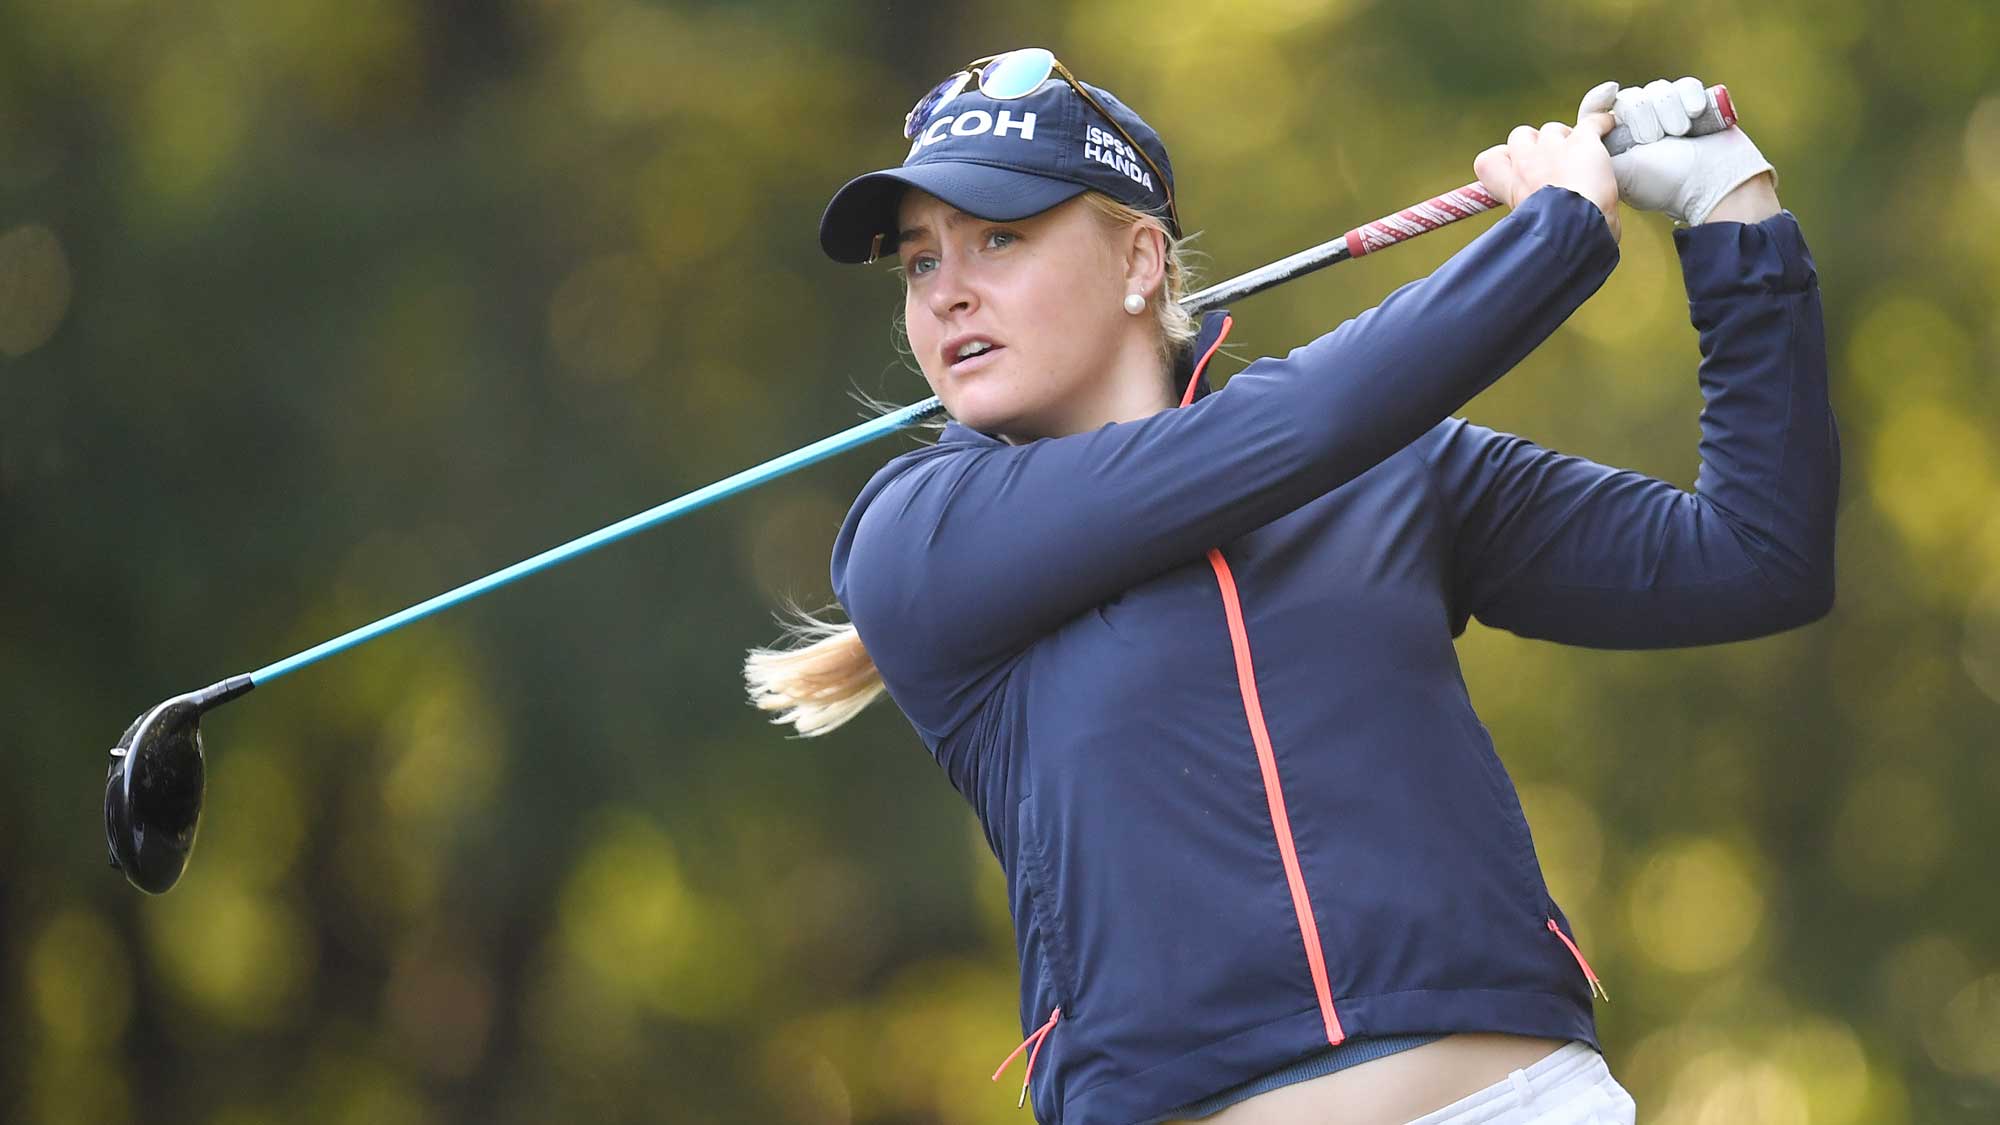 Charley Hull of Great Britain hits her tee shot on the 2nd hole during the final round of the TOTO Japan Classic